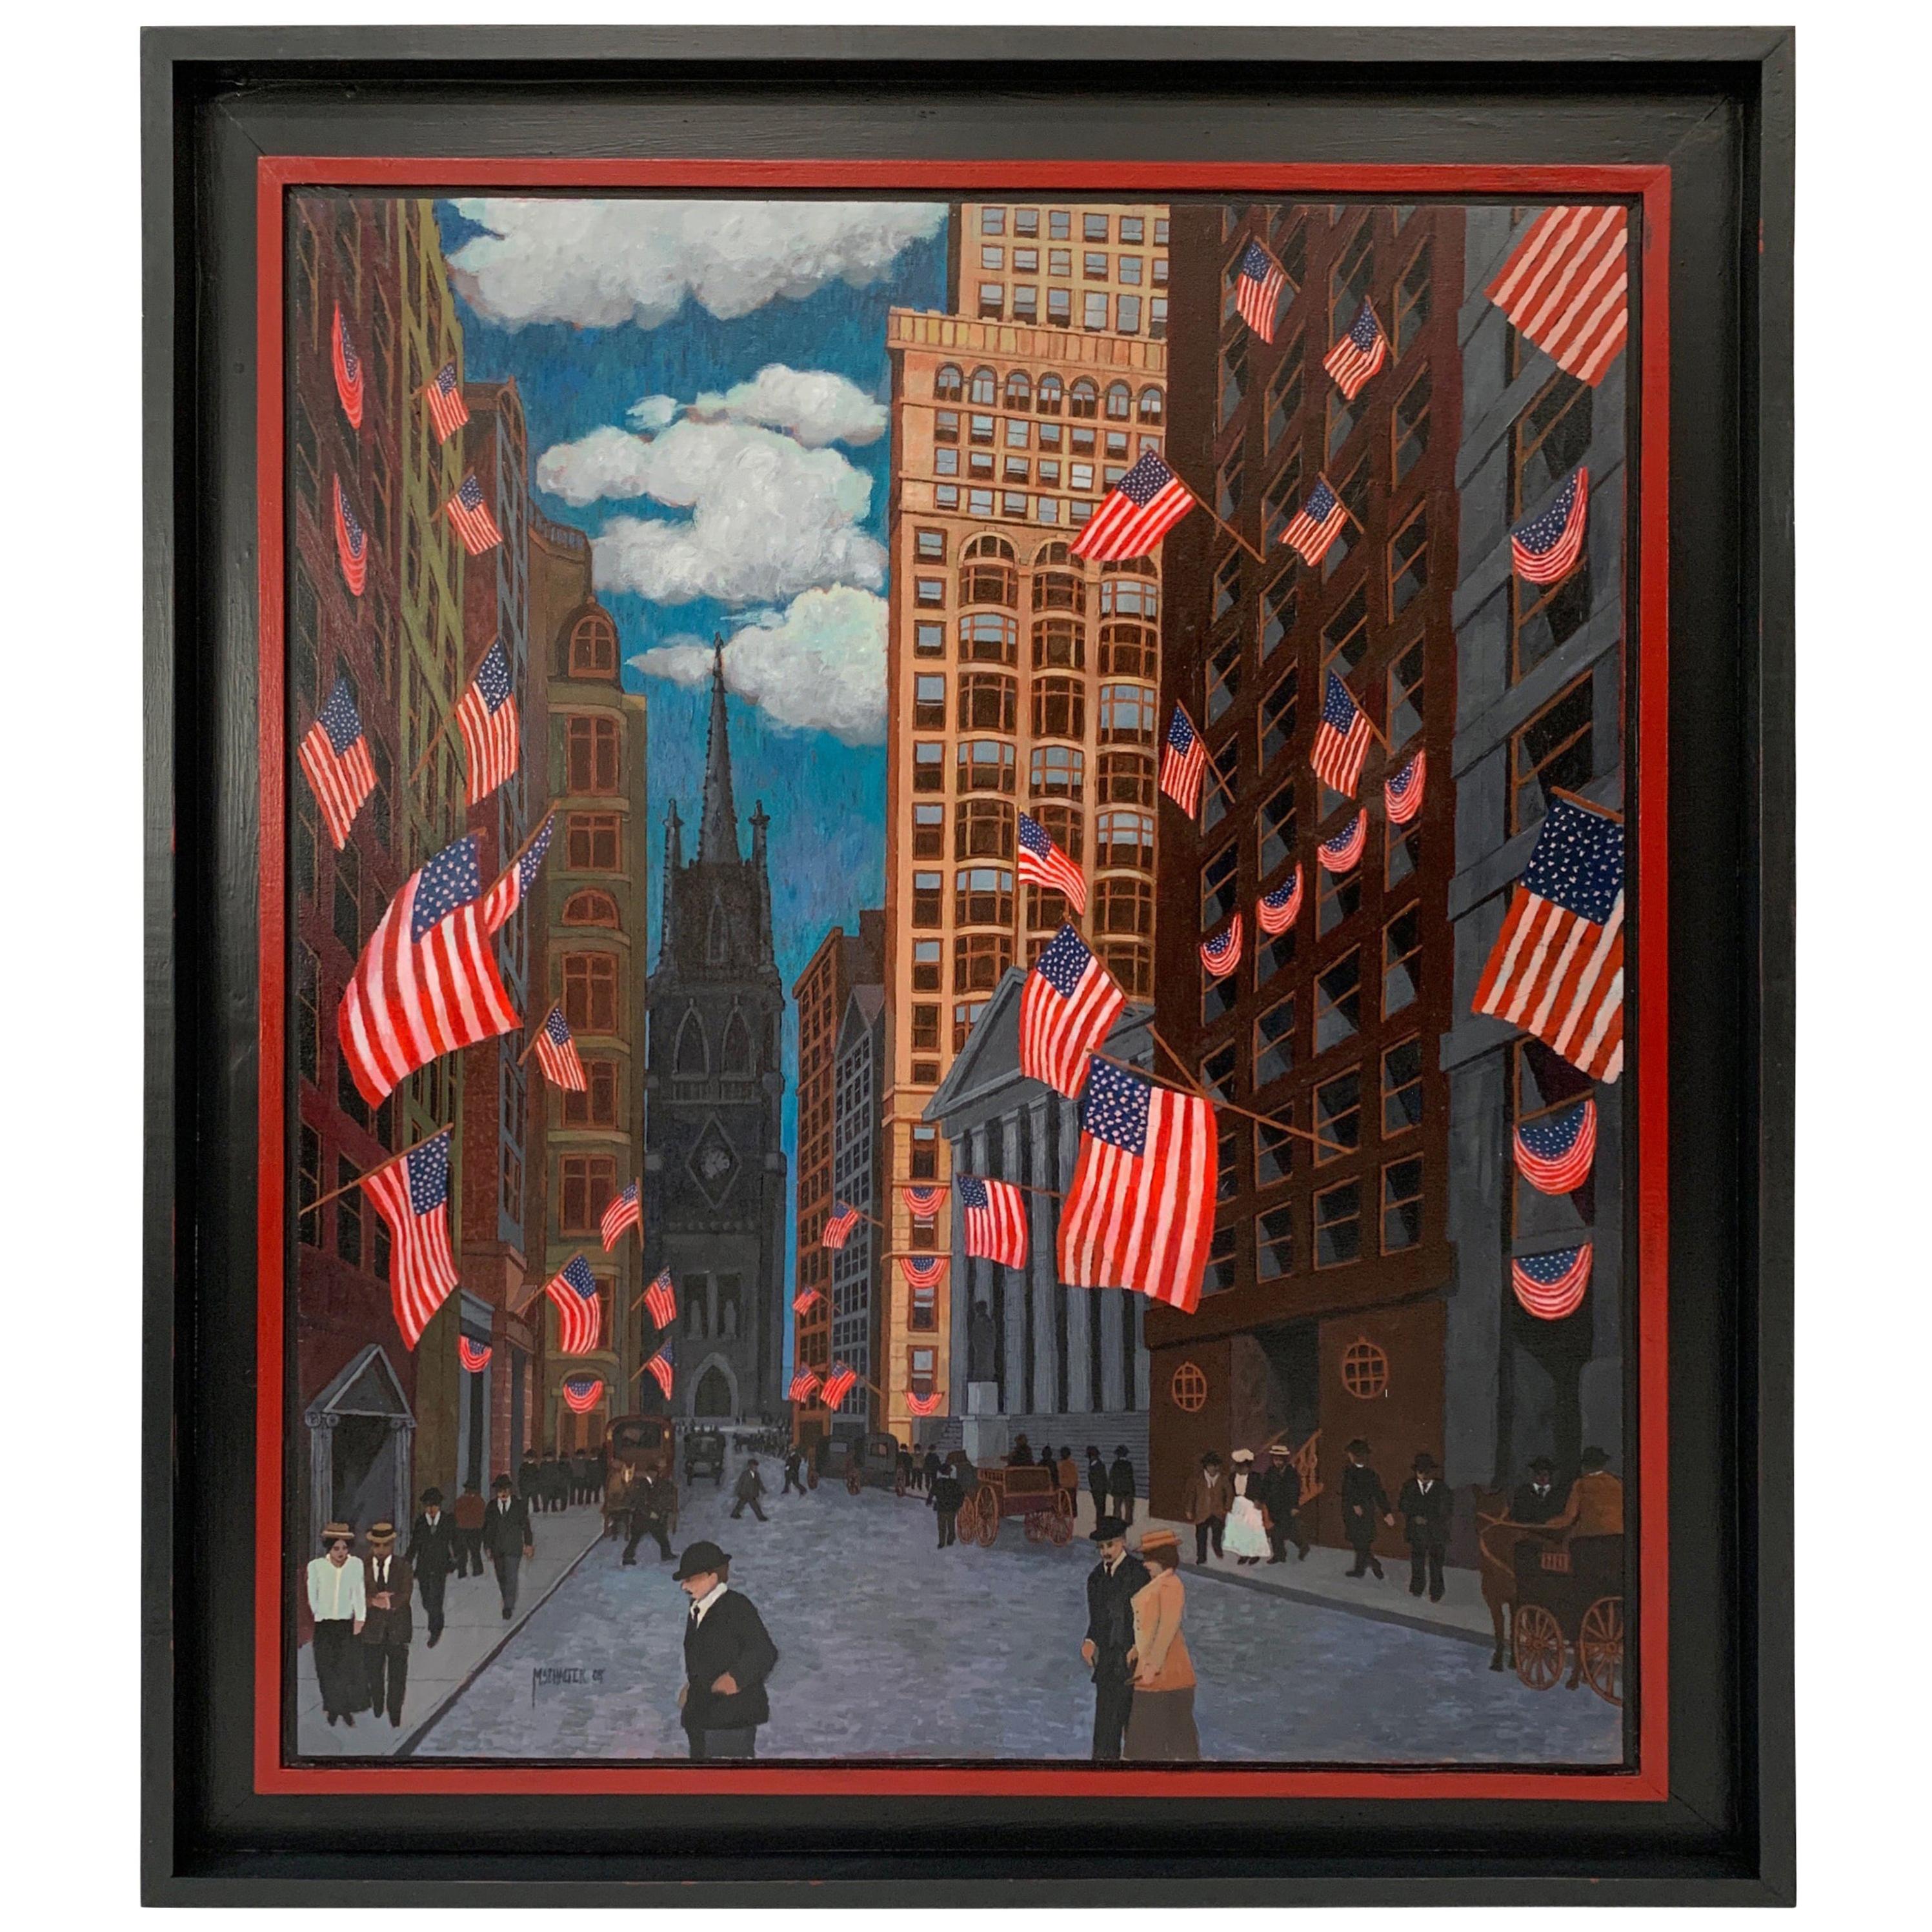 Wall Street Oil Painting "A Bullish Fourth" by Malcolm Schacter, New York